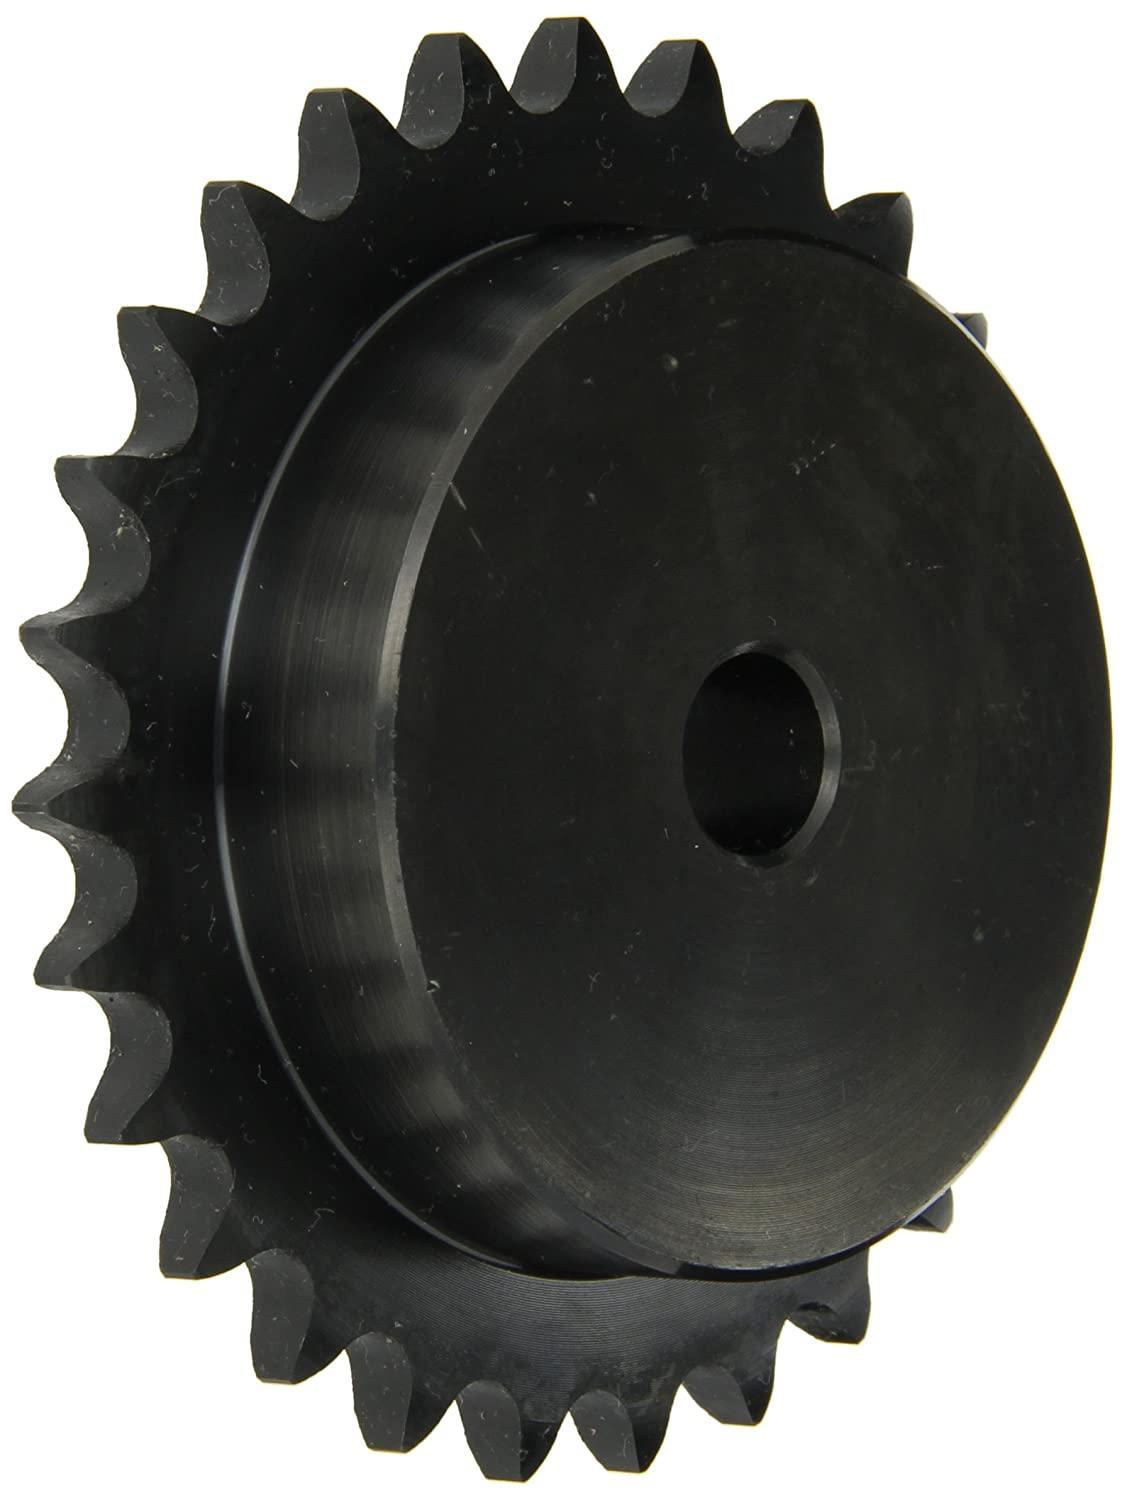 100B38 Roller Chain Sprocket With Stock Bore - Forces Inc